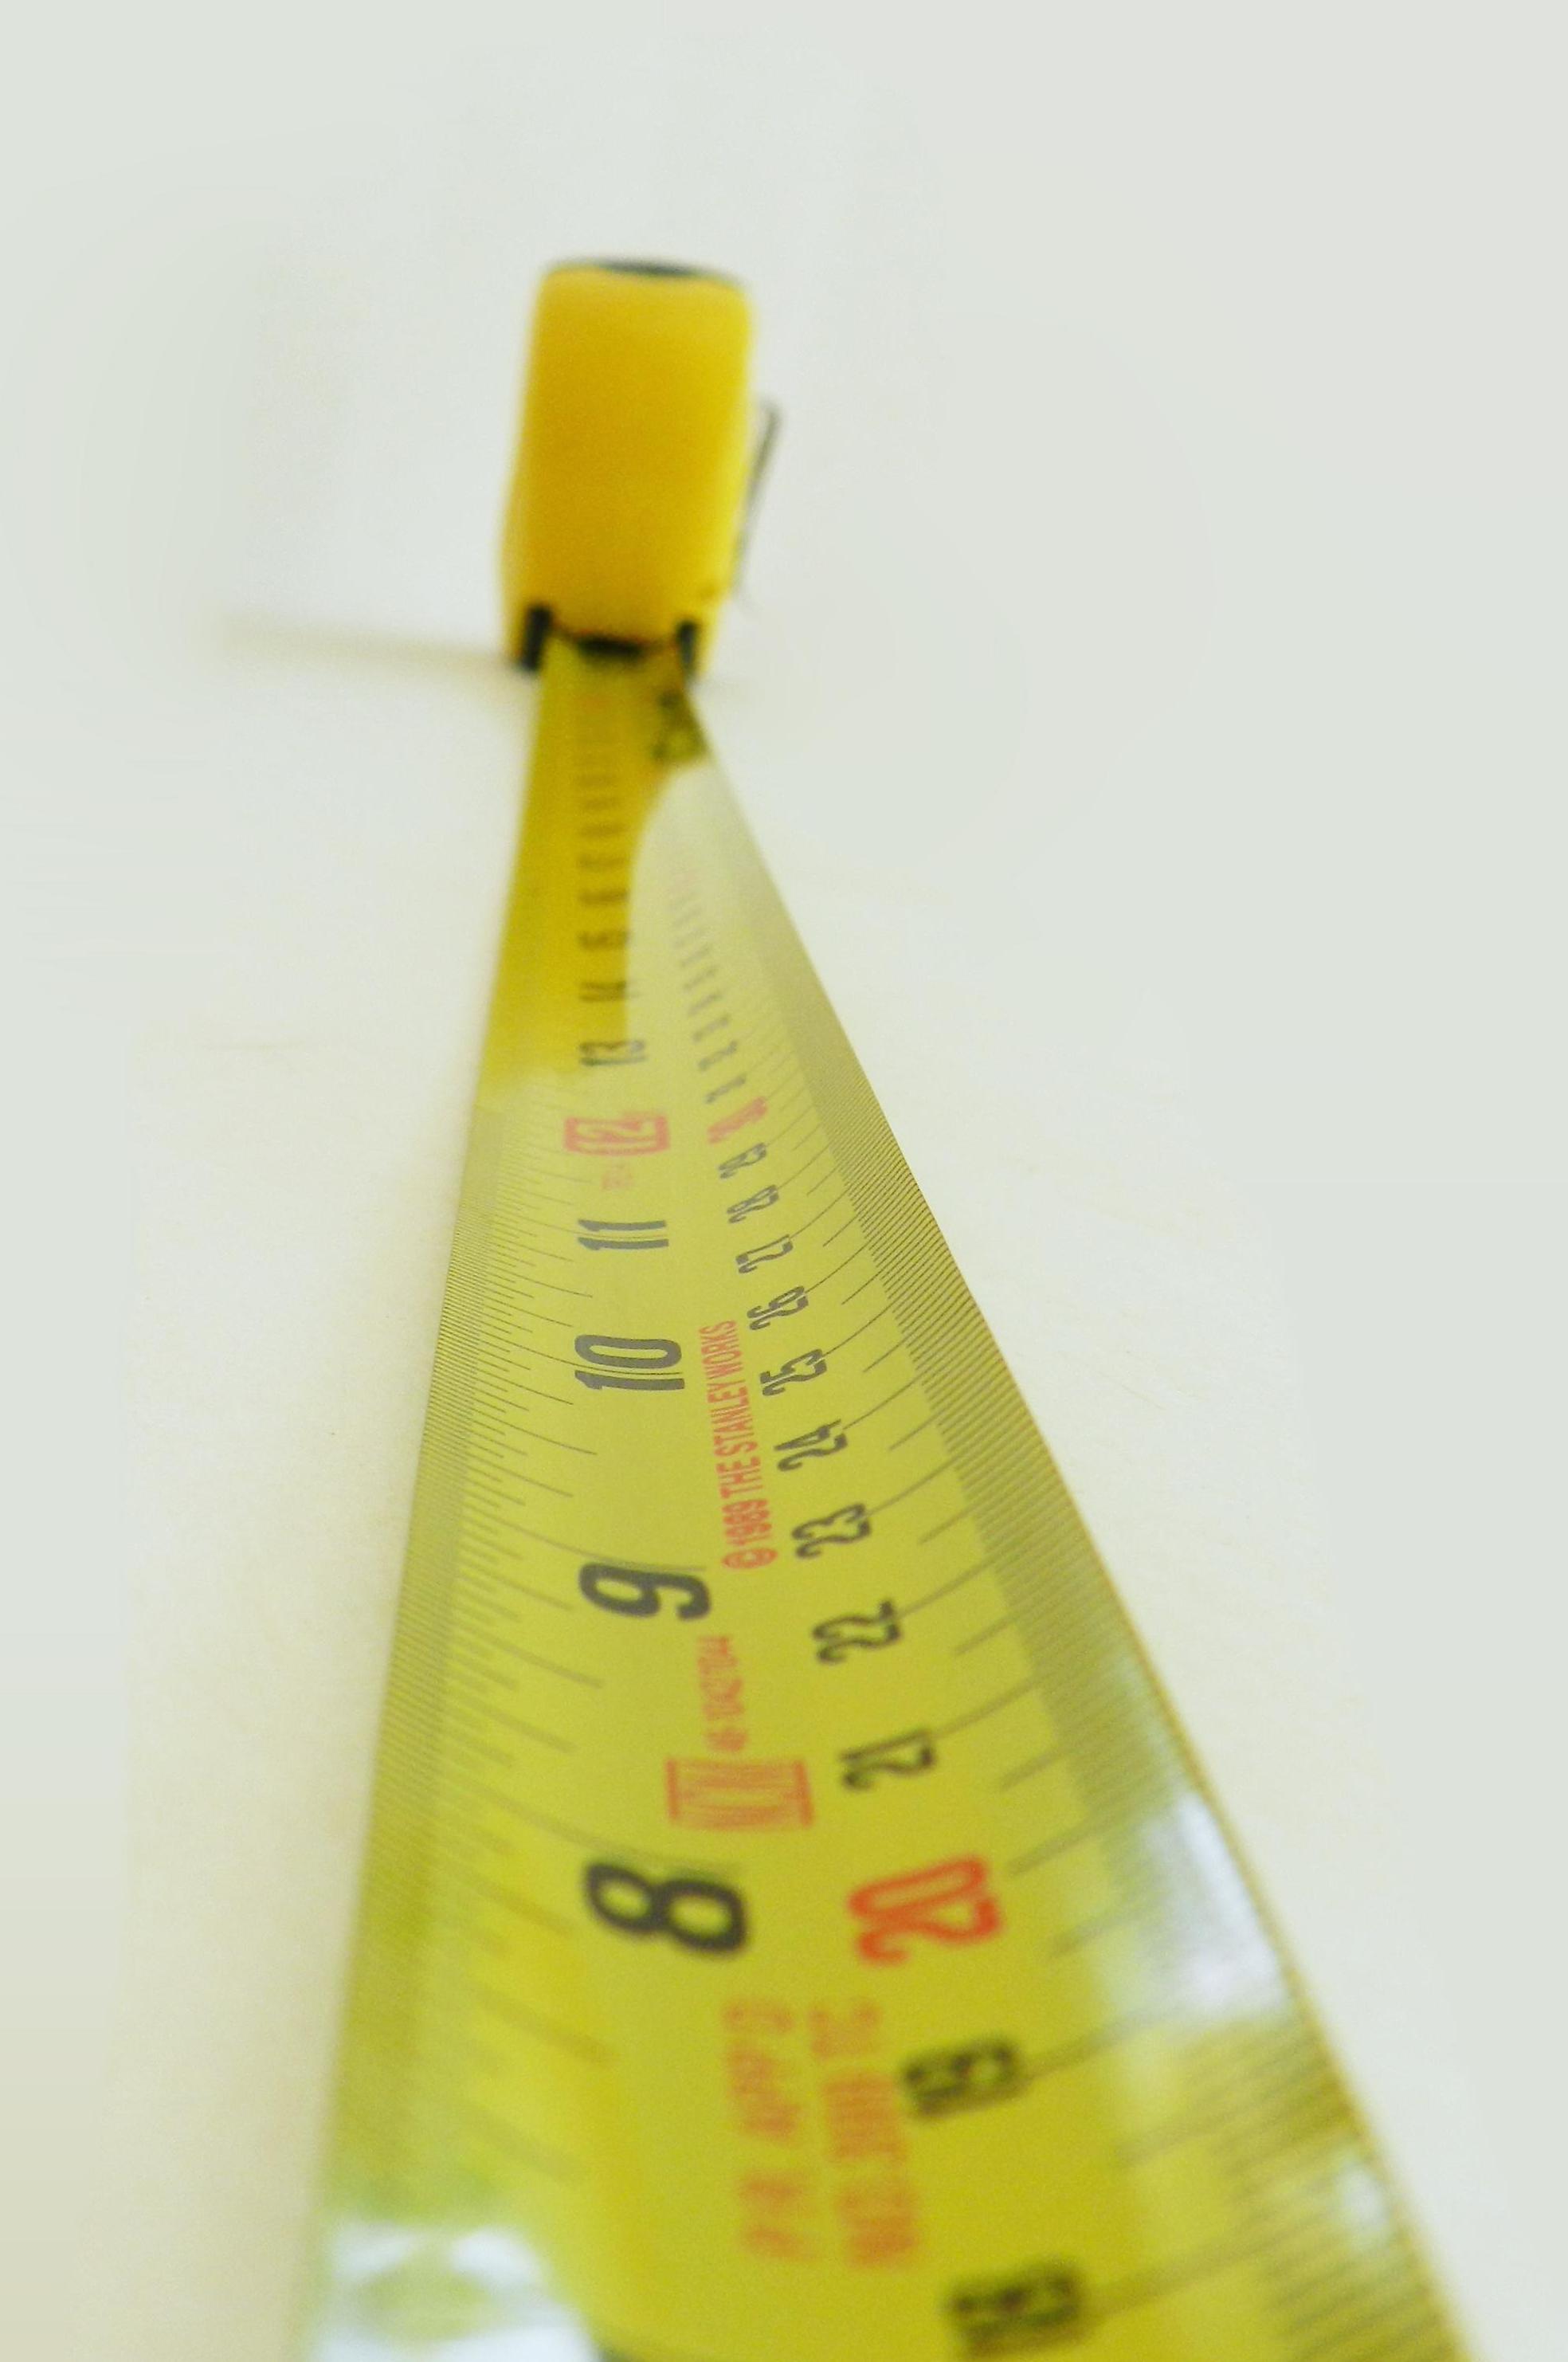 Measure your company's growth